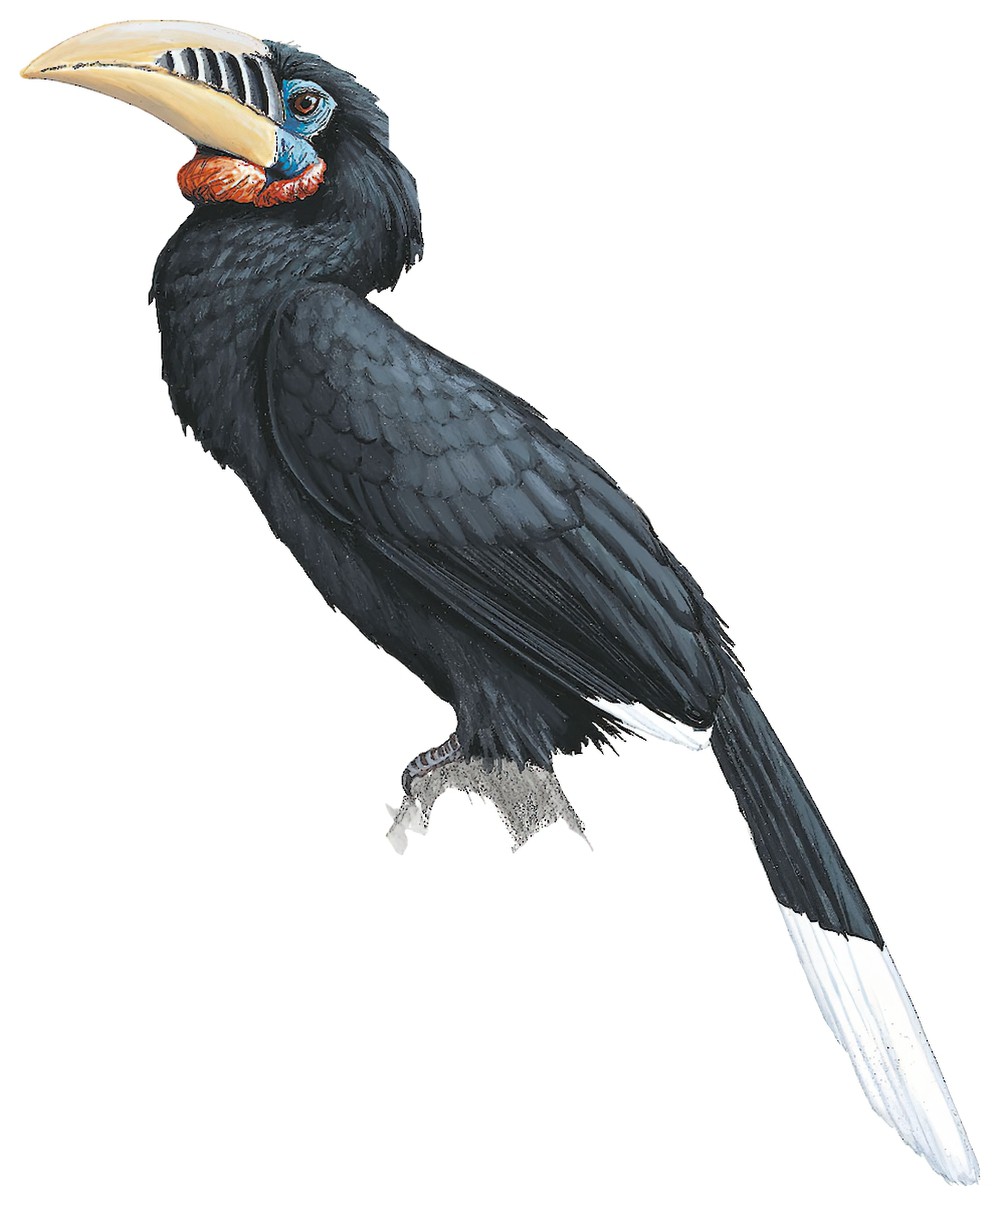 Rufous-necked Hornbill / Aceros nipalensis